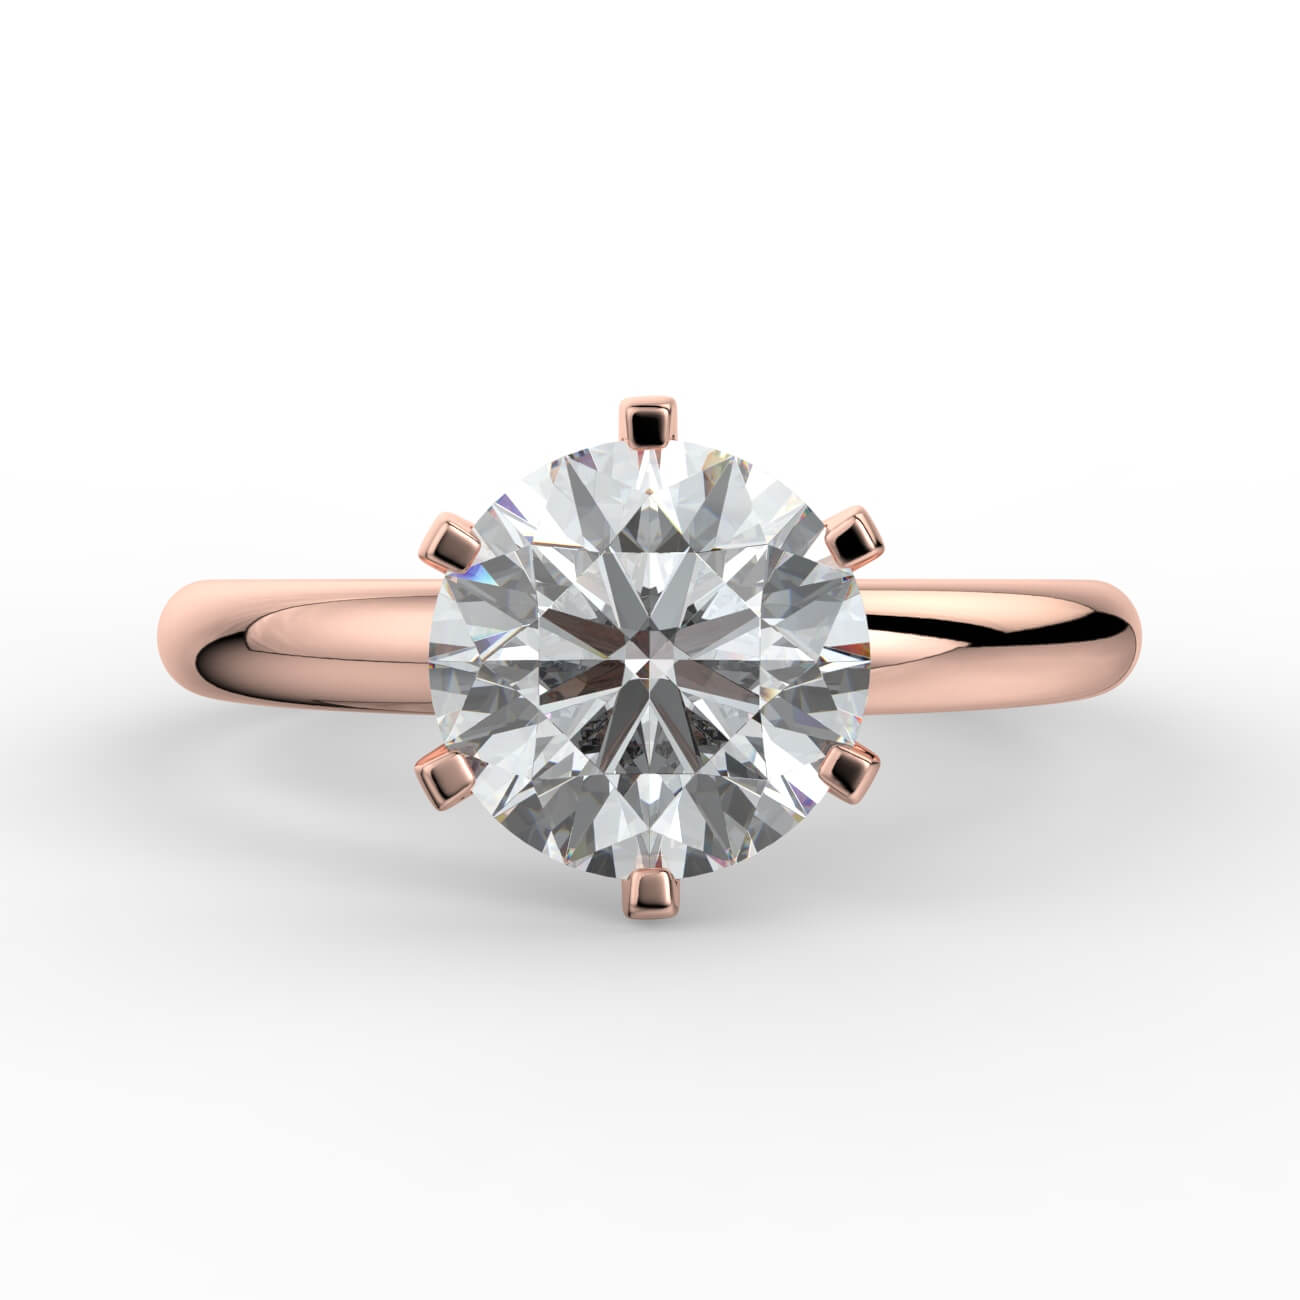 Comfort fit 6 claw solitaire diamond ring in rose gold – Australian Diamond Network